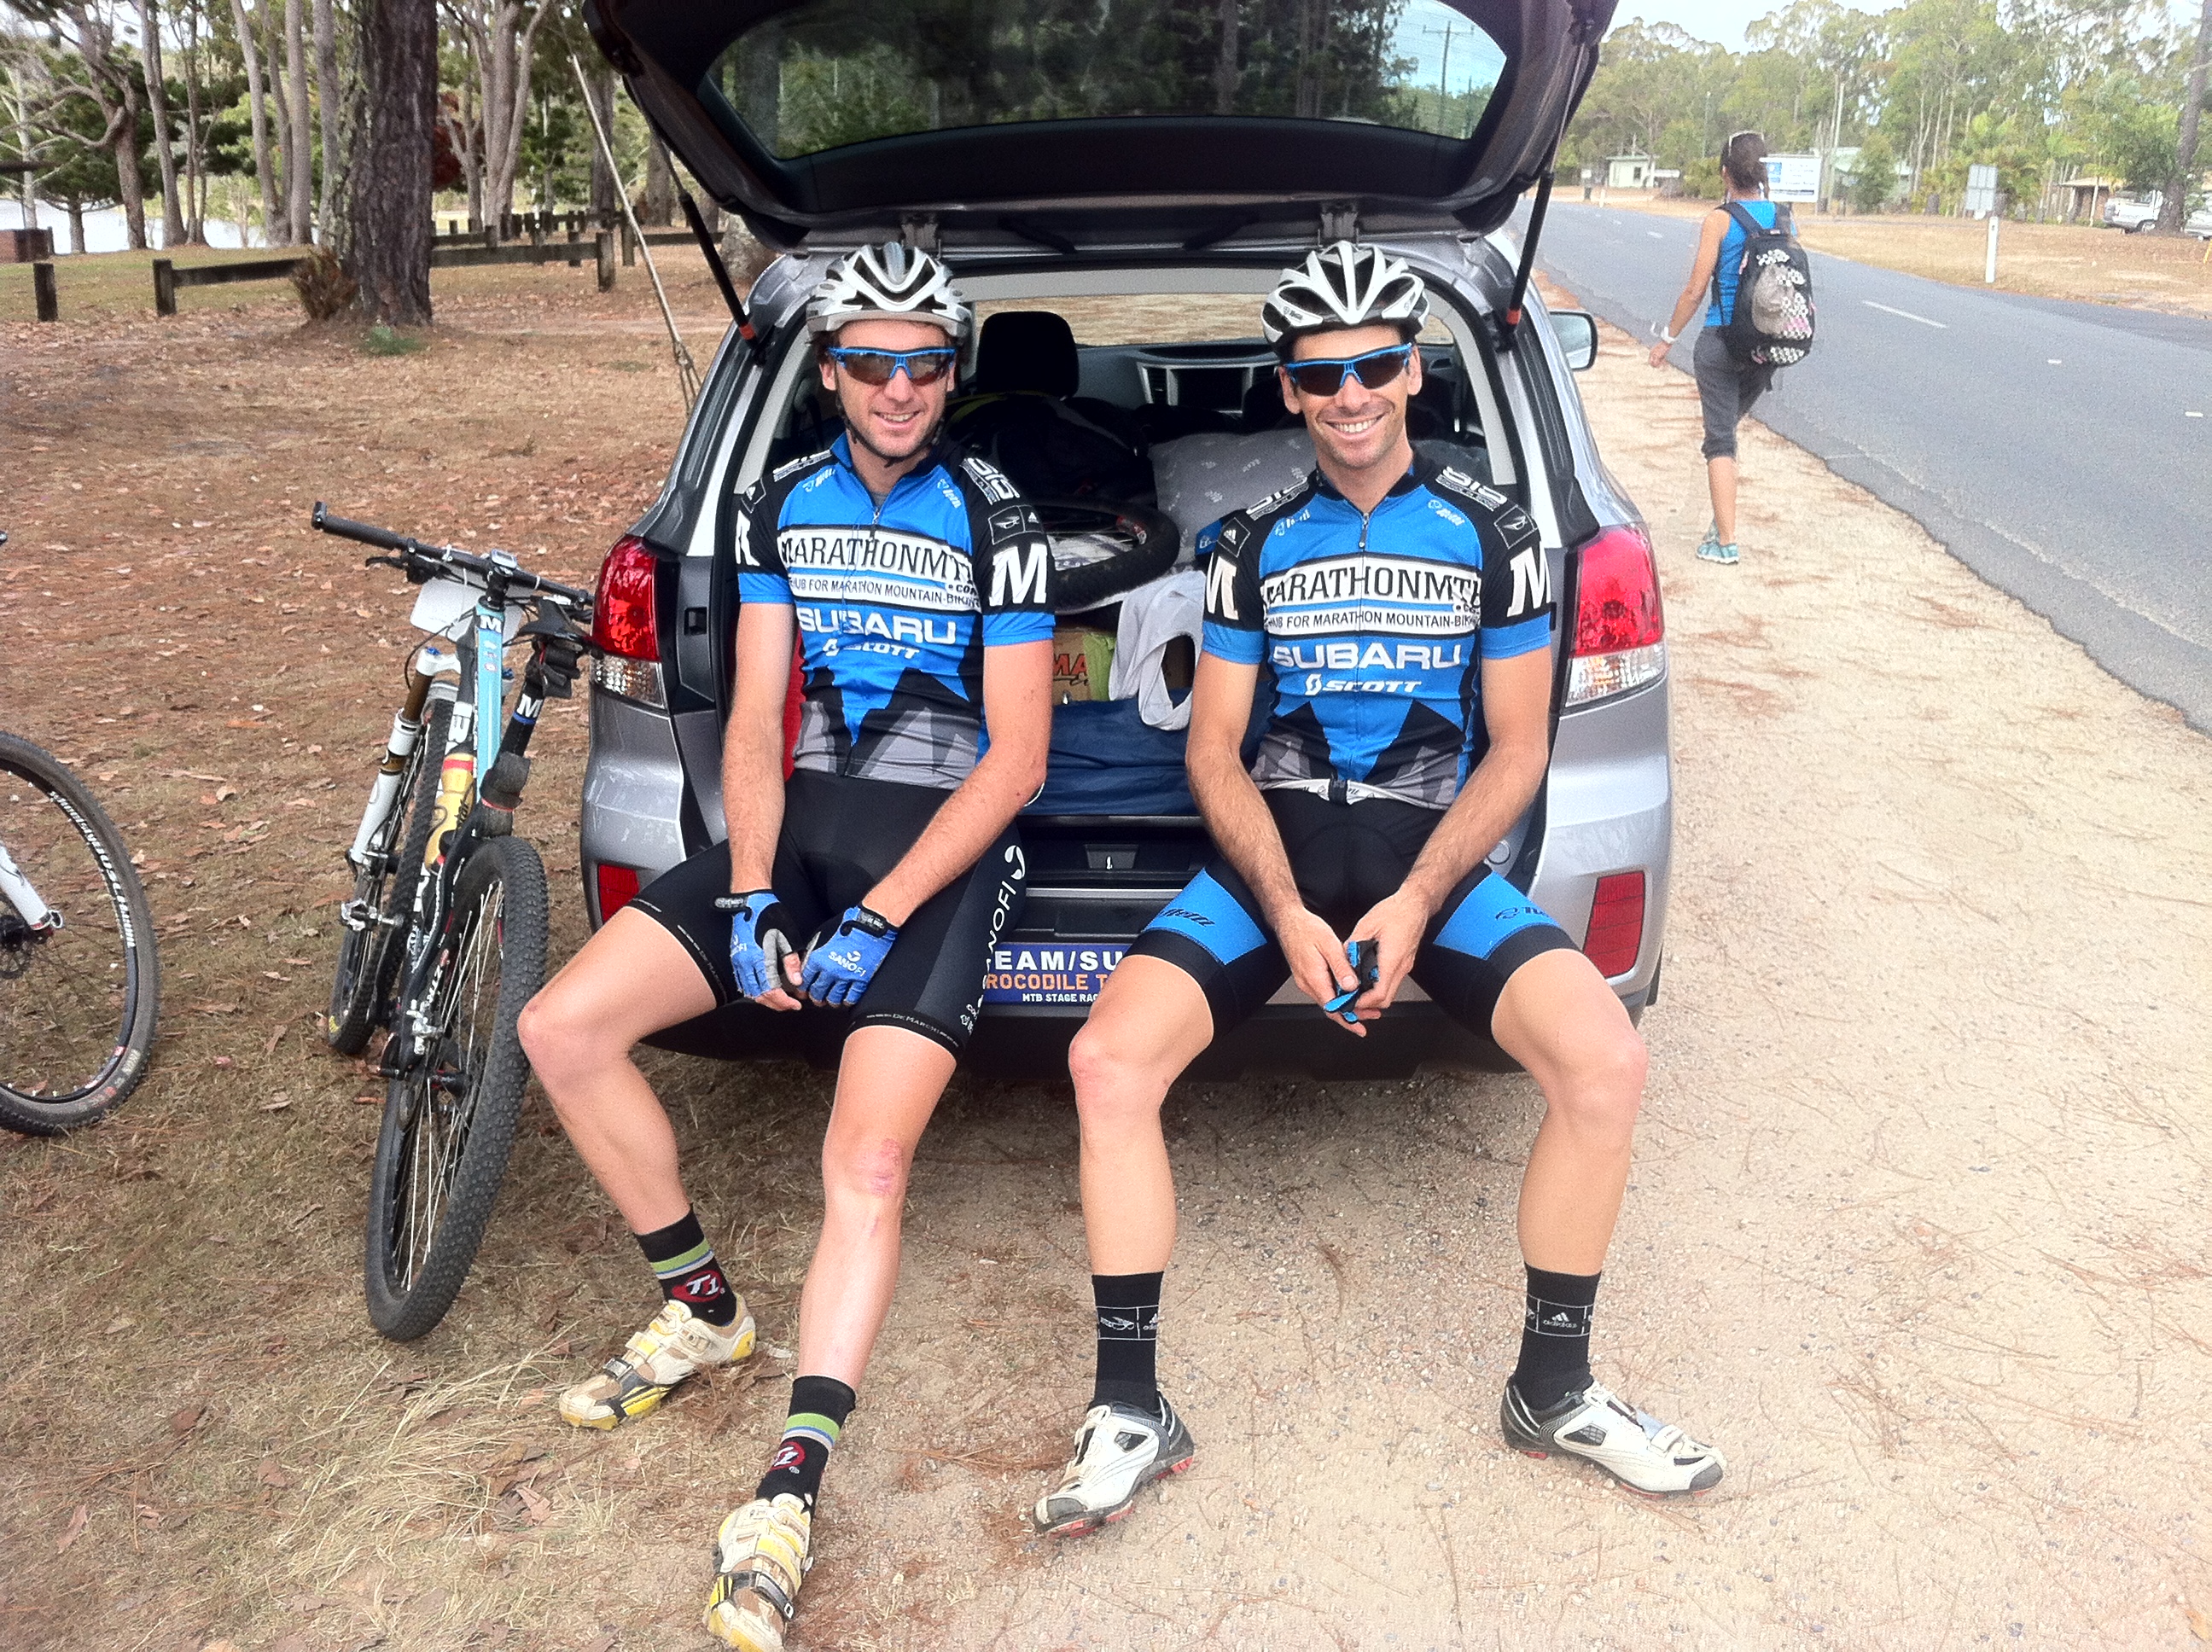 Justin Maddog Morris and Mike Blewitt - taking a load off before helping to defend Werner's leaders jersey.